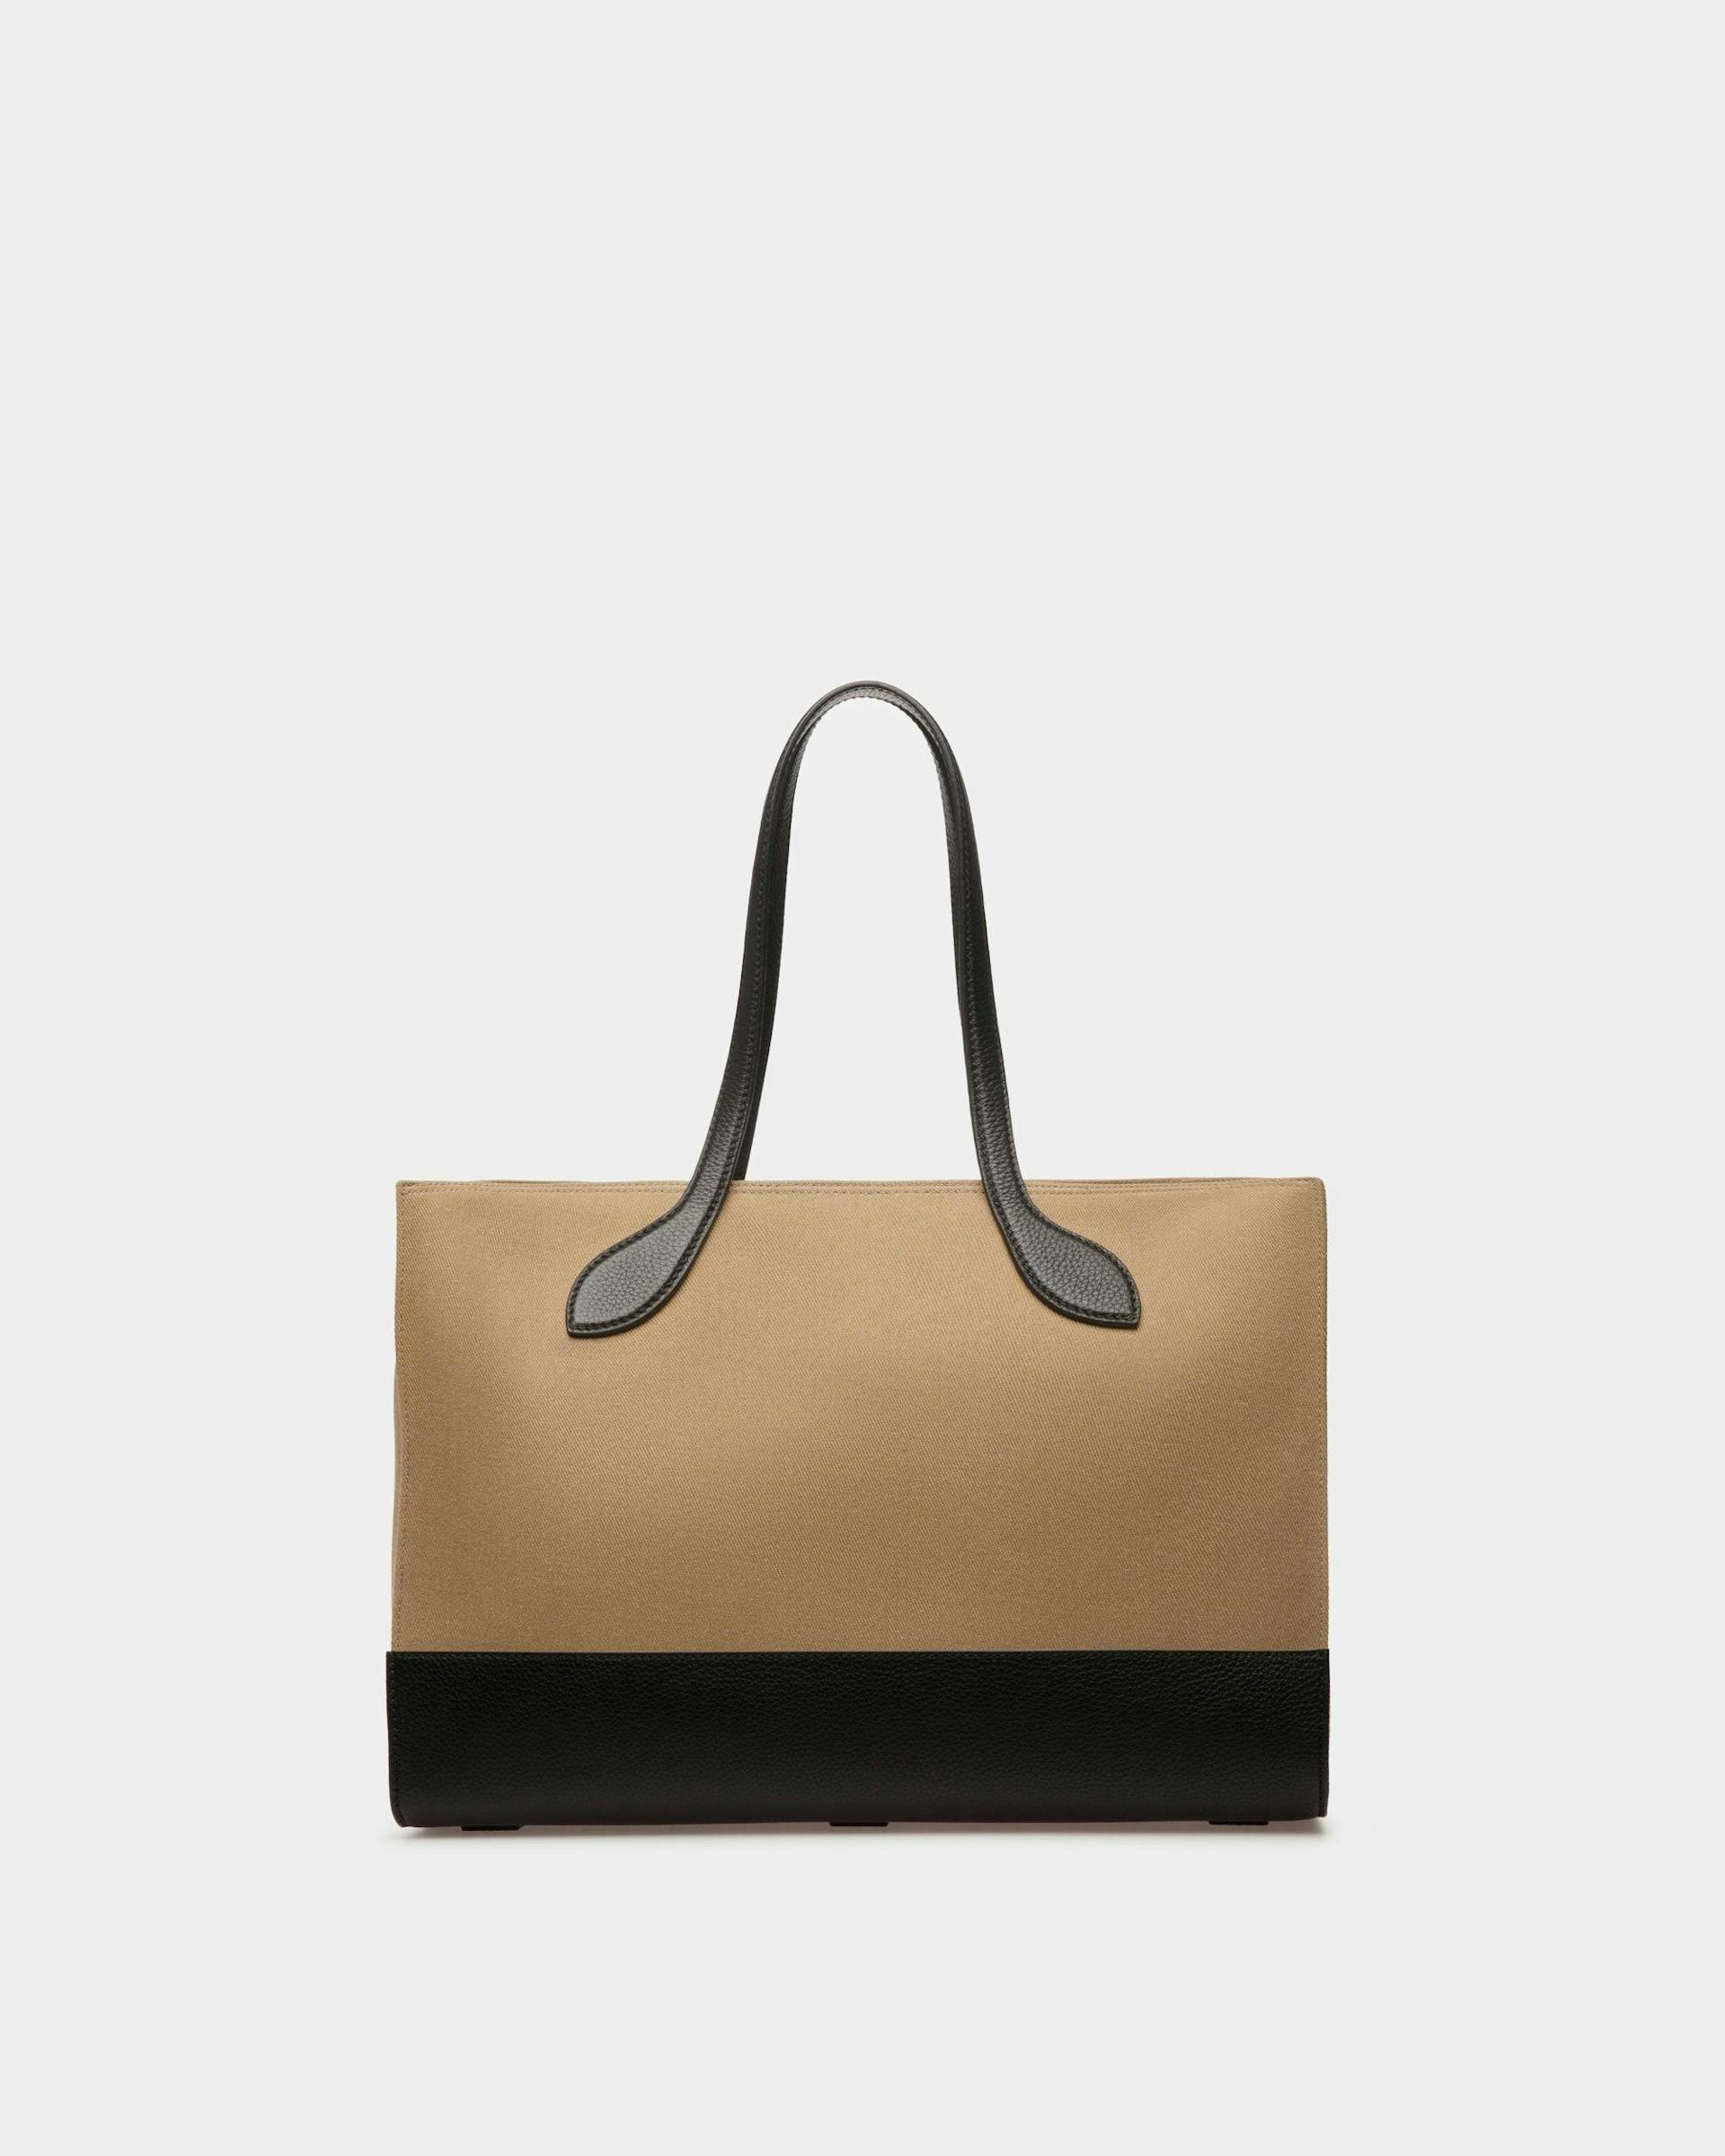 Women's Bar Tote Bag In Sand And Black Fabric | Bally | Still Life Back